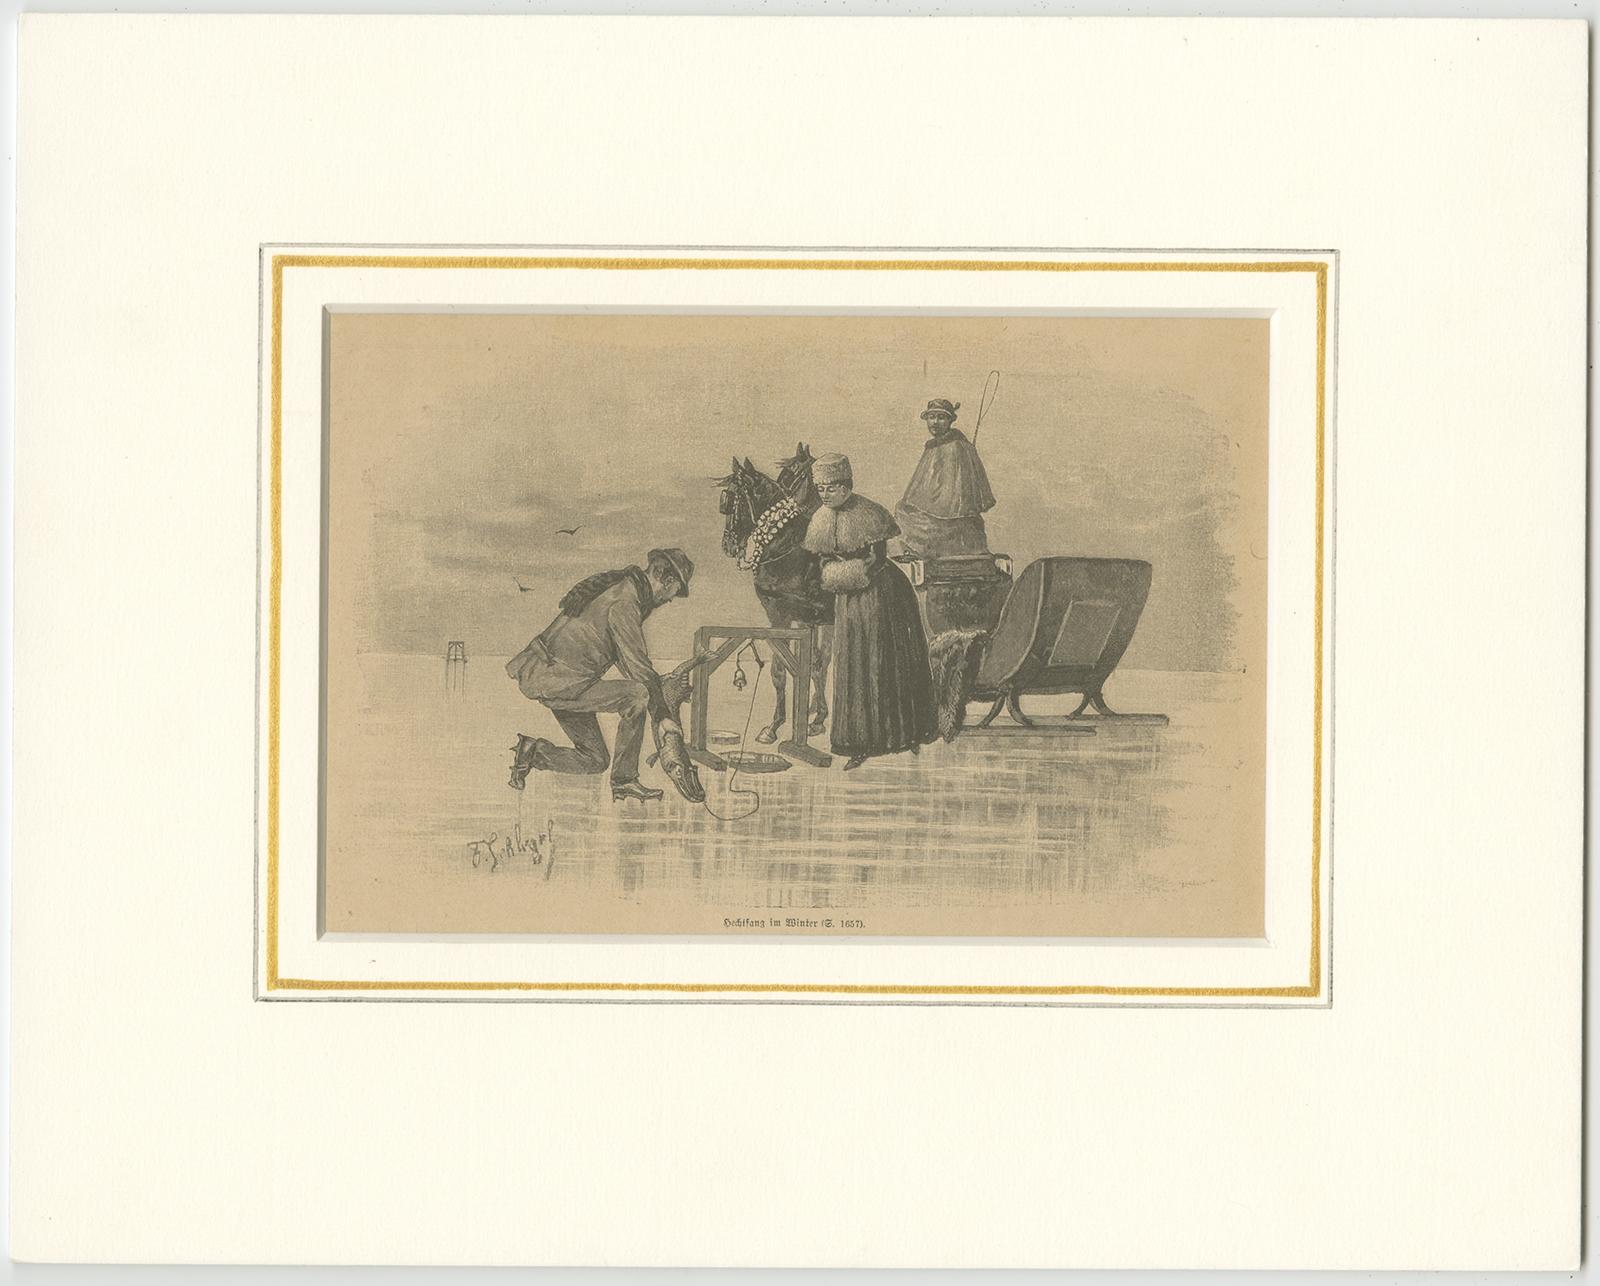 Antique print titled 'Hechtfang im Winter'. Original antique print of ice fishing. Published circa 1900.

Artists and Engravers: Anonymous.

Condition: Good, general age-related toning. Passepartout/matting included. Please study image carefully.